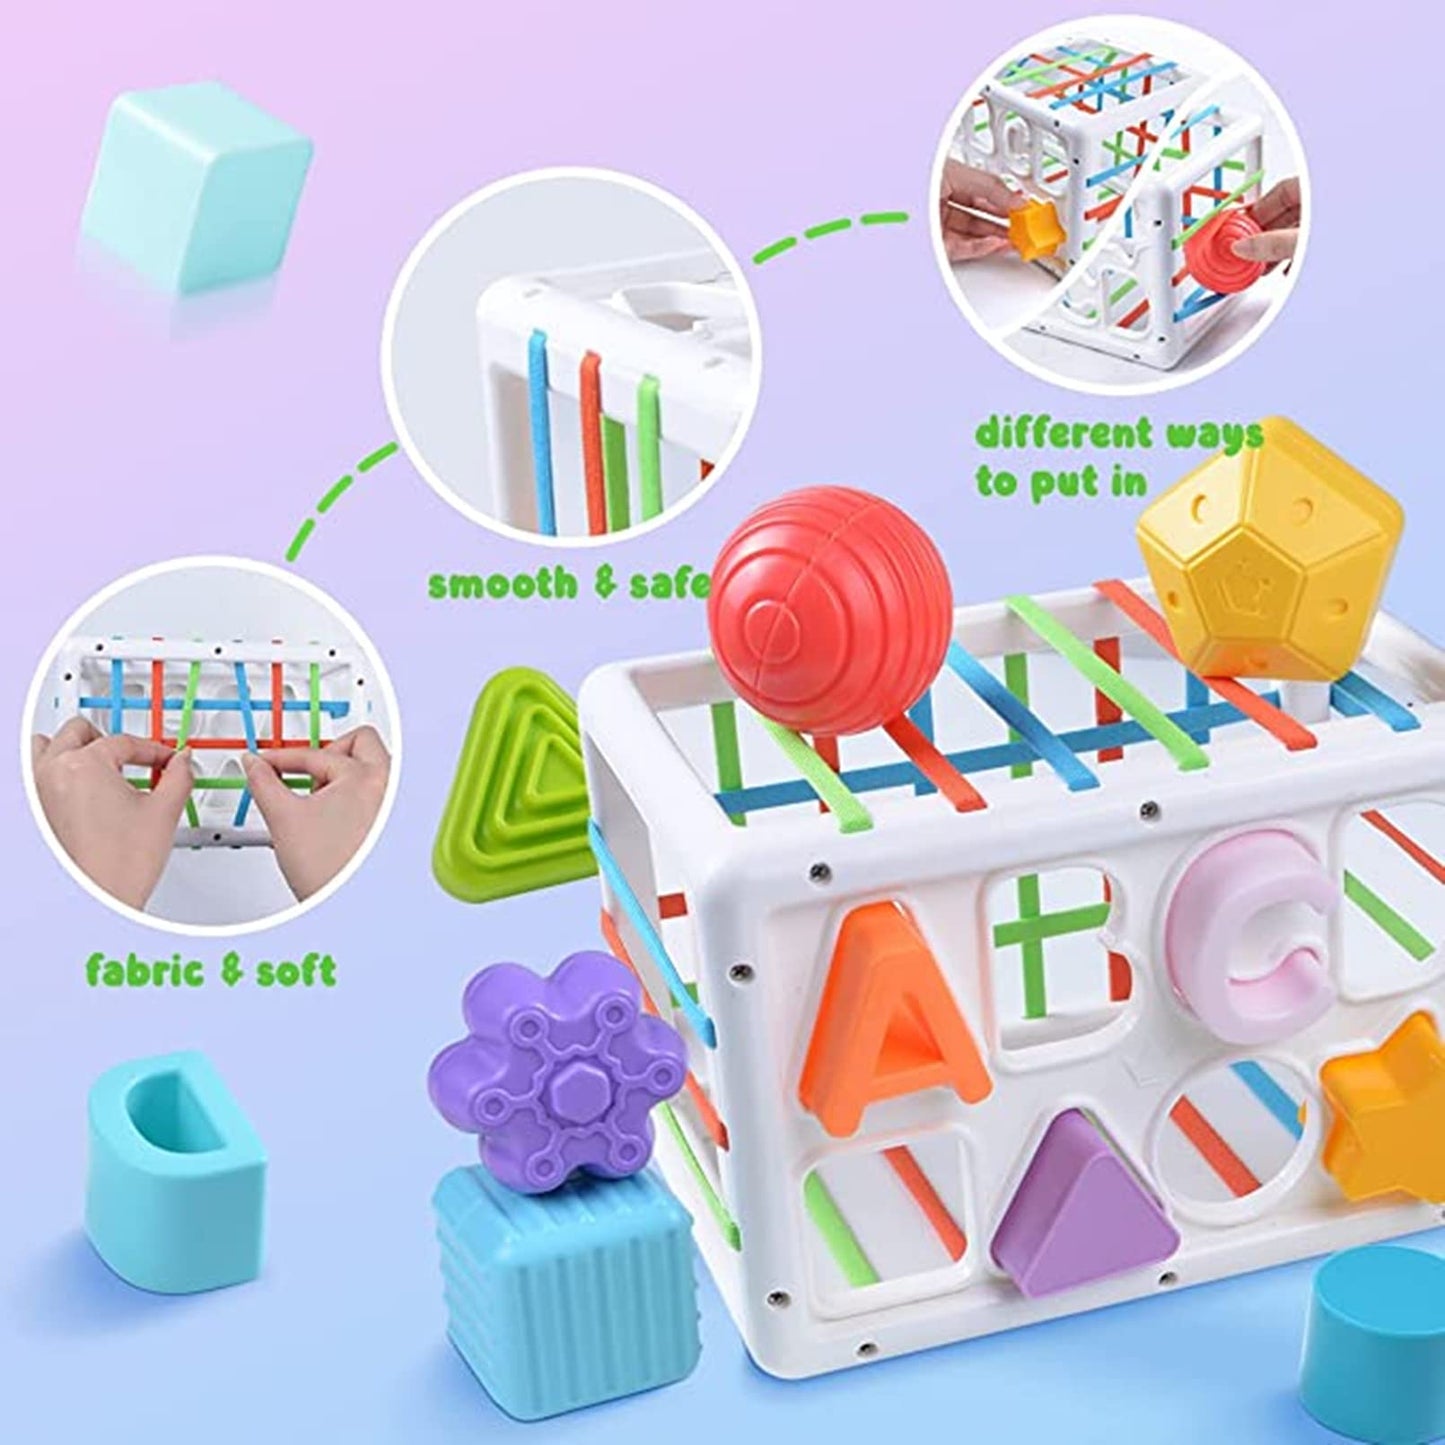 AM ANNA Baby Shape Sorting Toy, Sensory Sorting Bin with Elastic Bands, Colorful Cube with 14PCS Sensory Shape Blocks,Sorter Sorting Brain Toys for Ages 12 Months+ (15Pcs Baby Shape Sorting Toy)